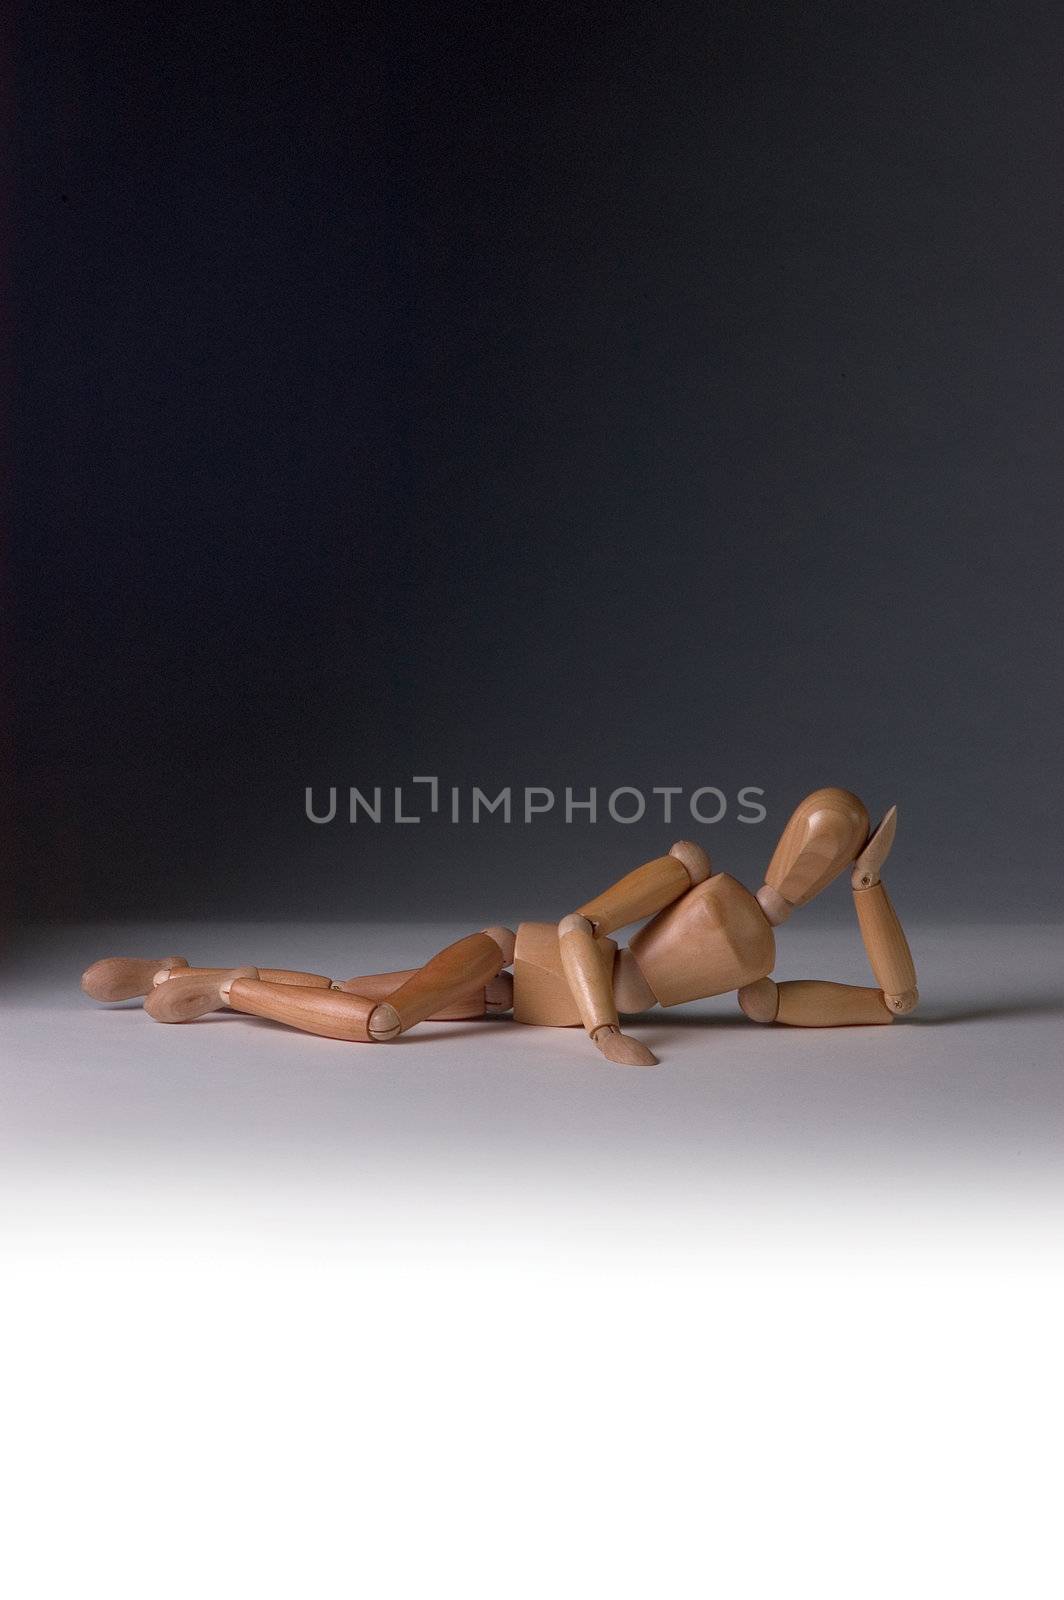 Wooden modelling mannequin in a sexy pose, reclined on one hand